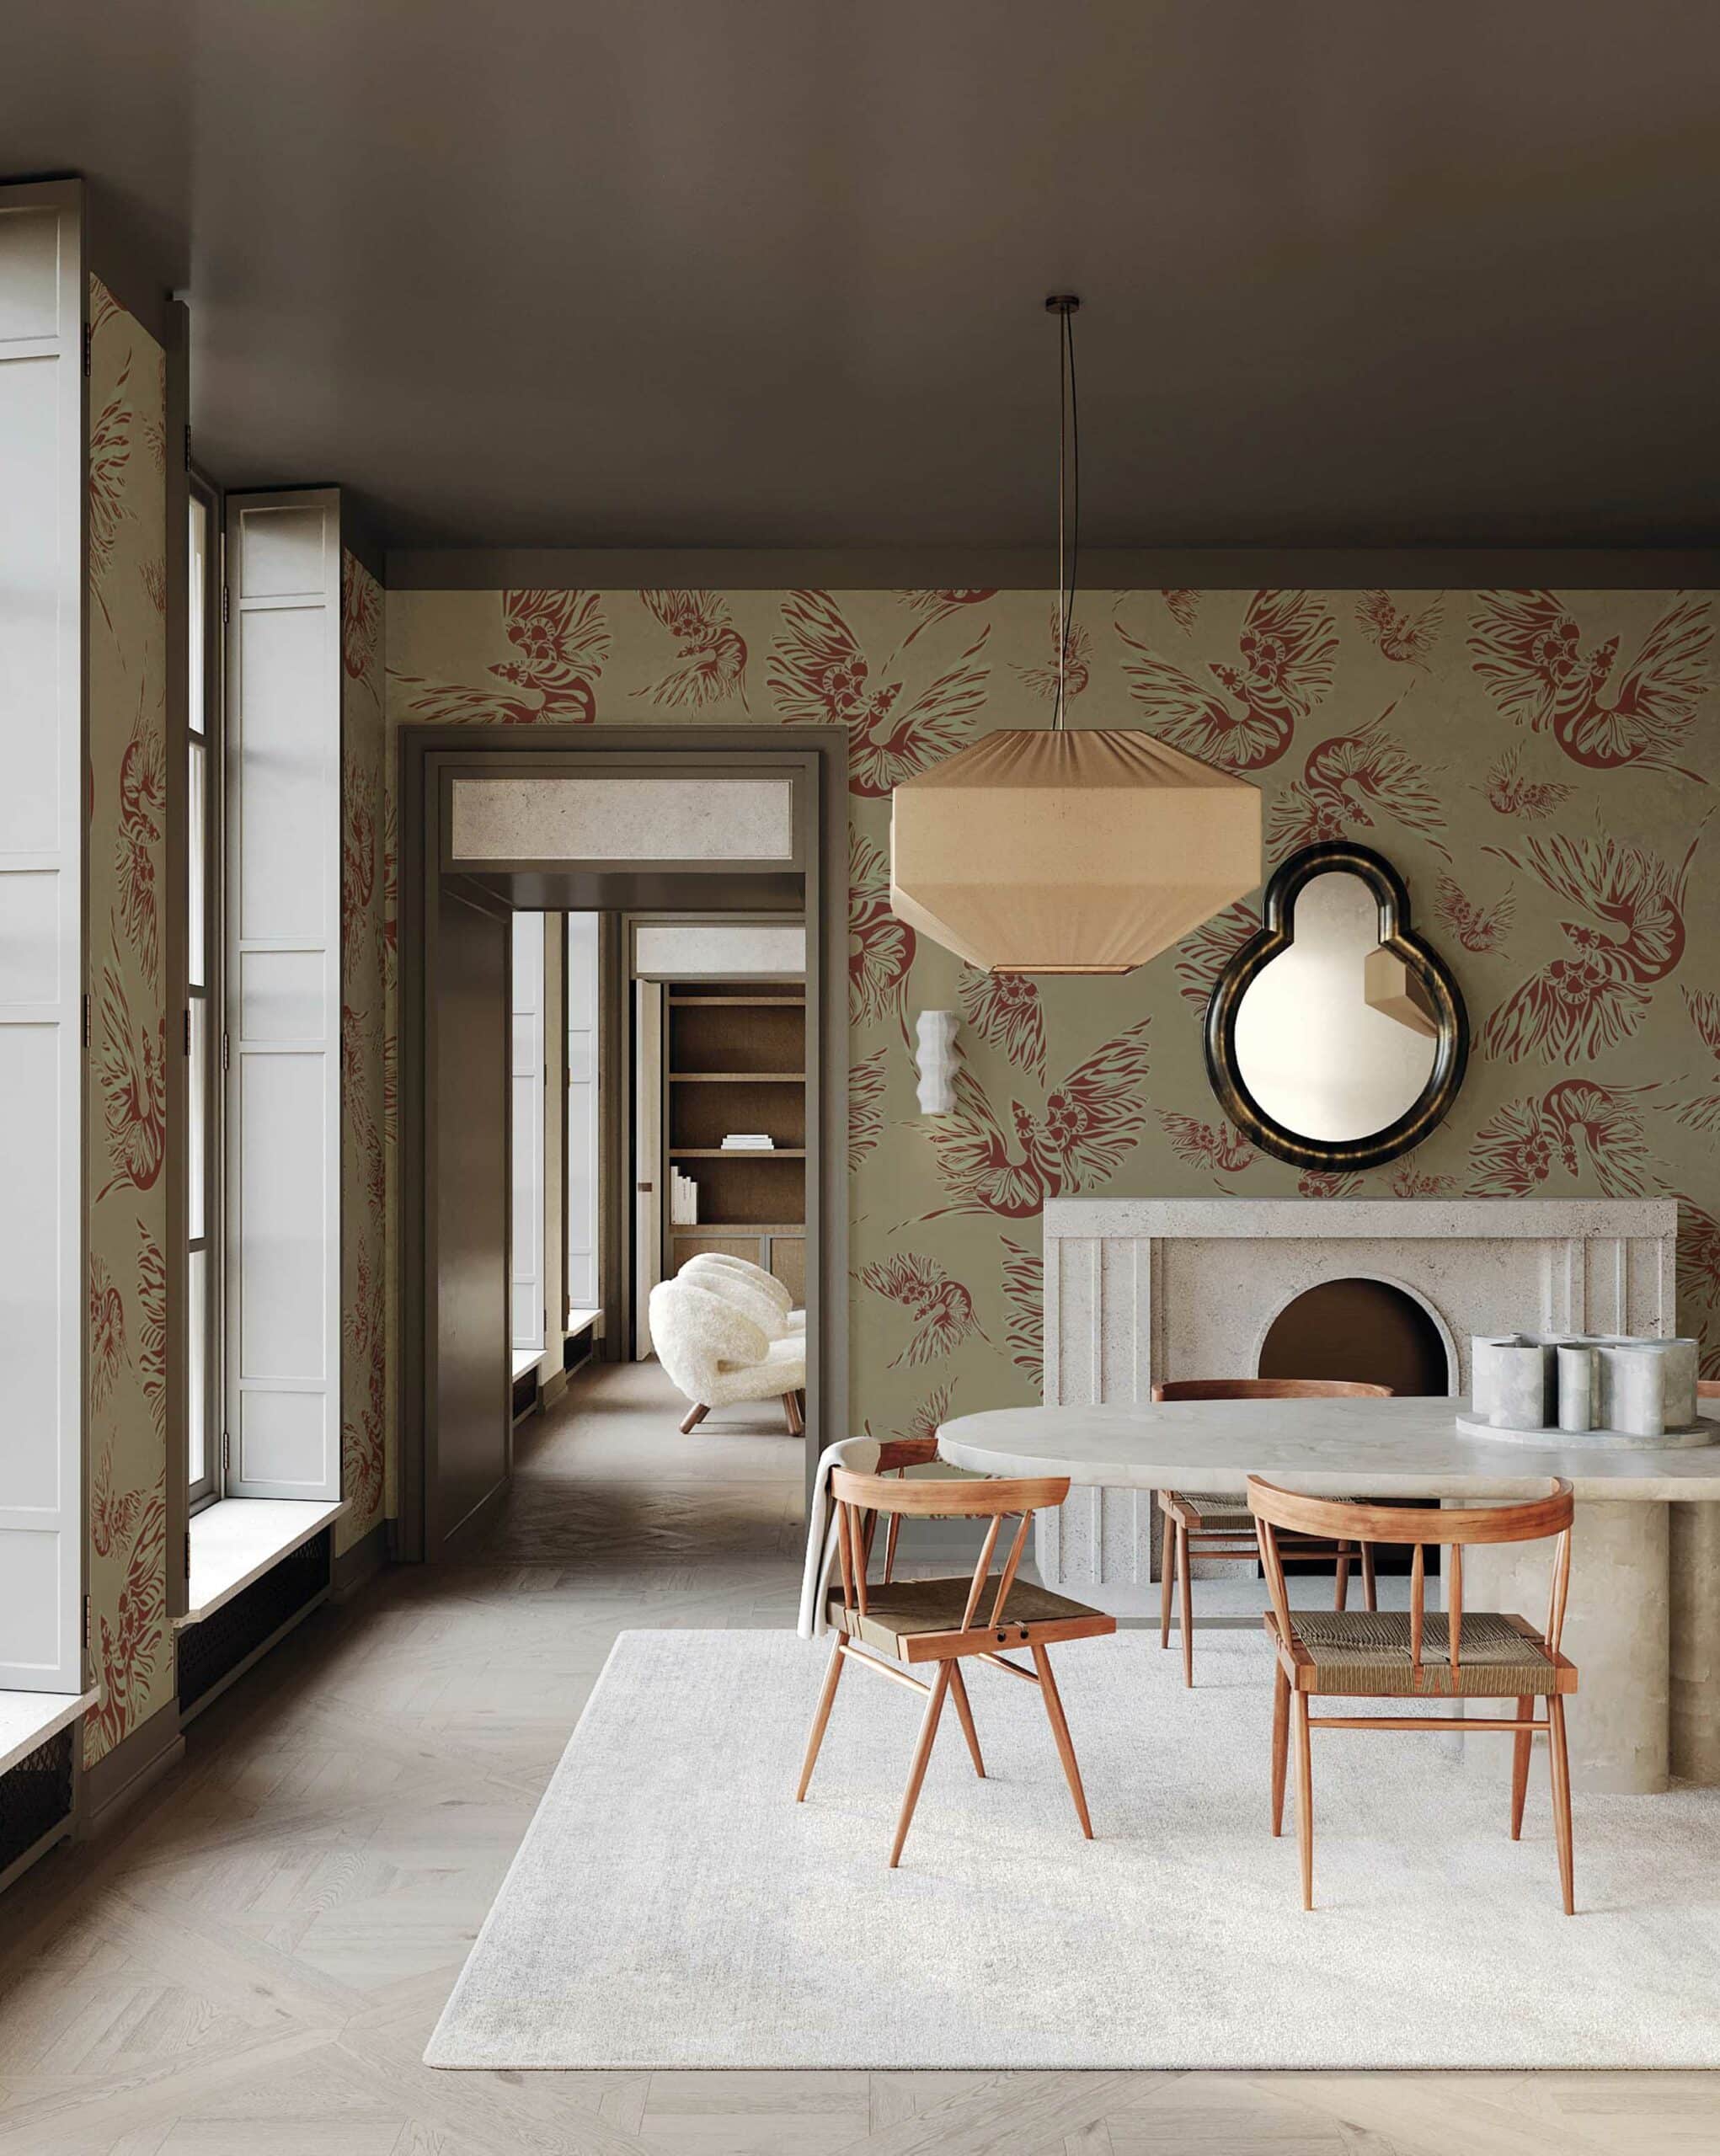 Mysterious-Beige-Earth-Wallpaper-Leonardo-Dini-x-MaVoix-Collection-Essentials-Cool-Dining-Room-